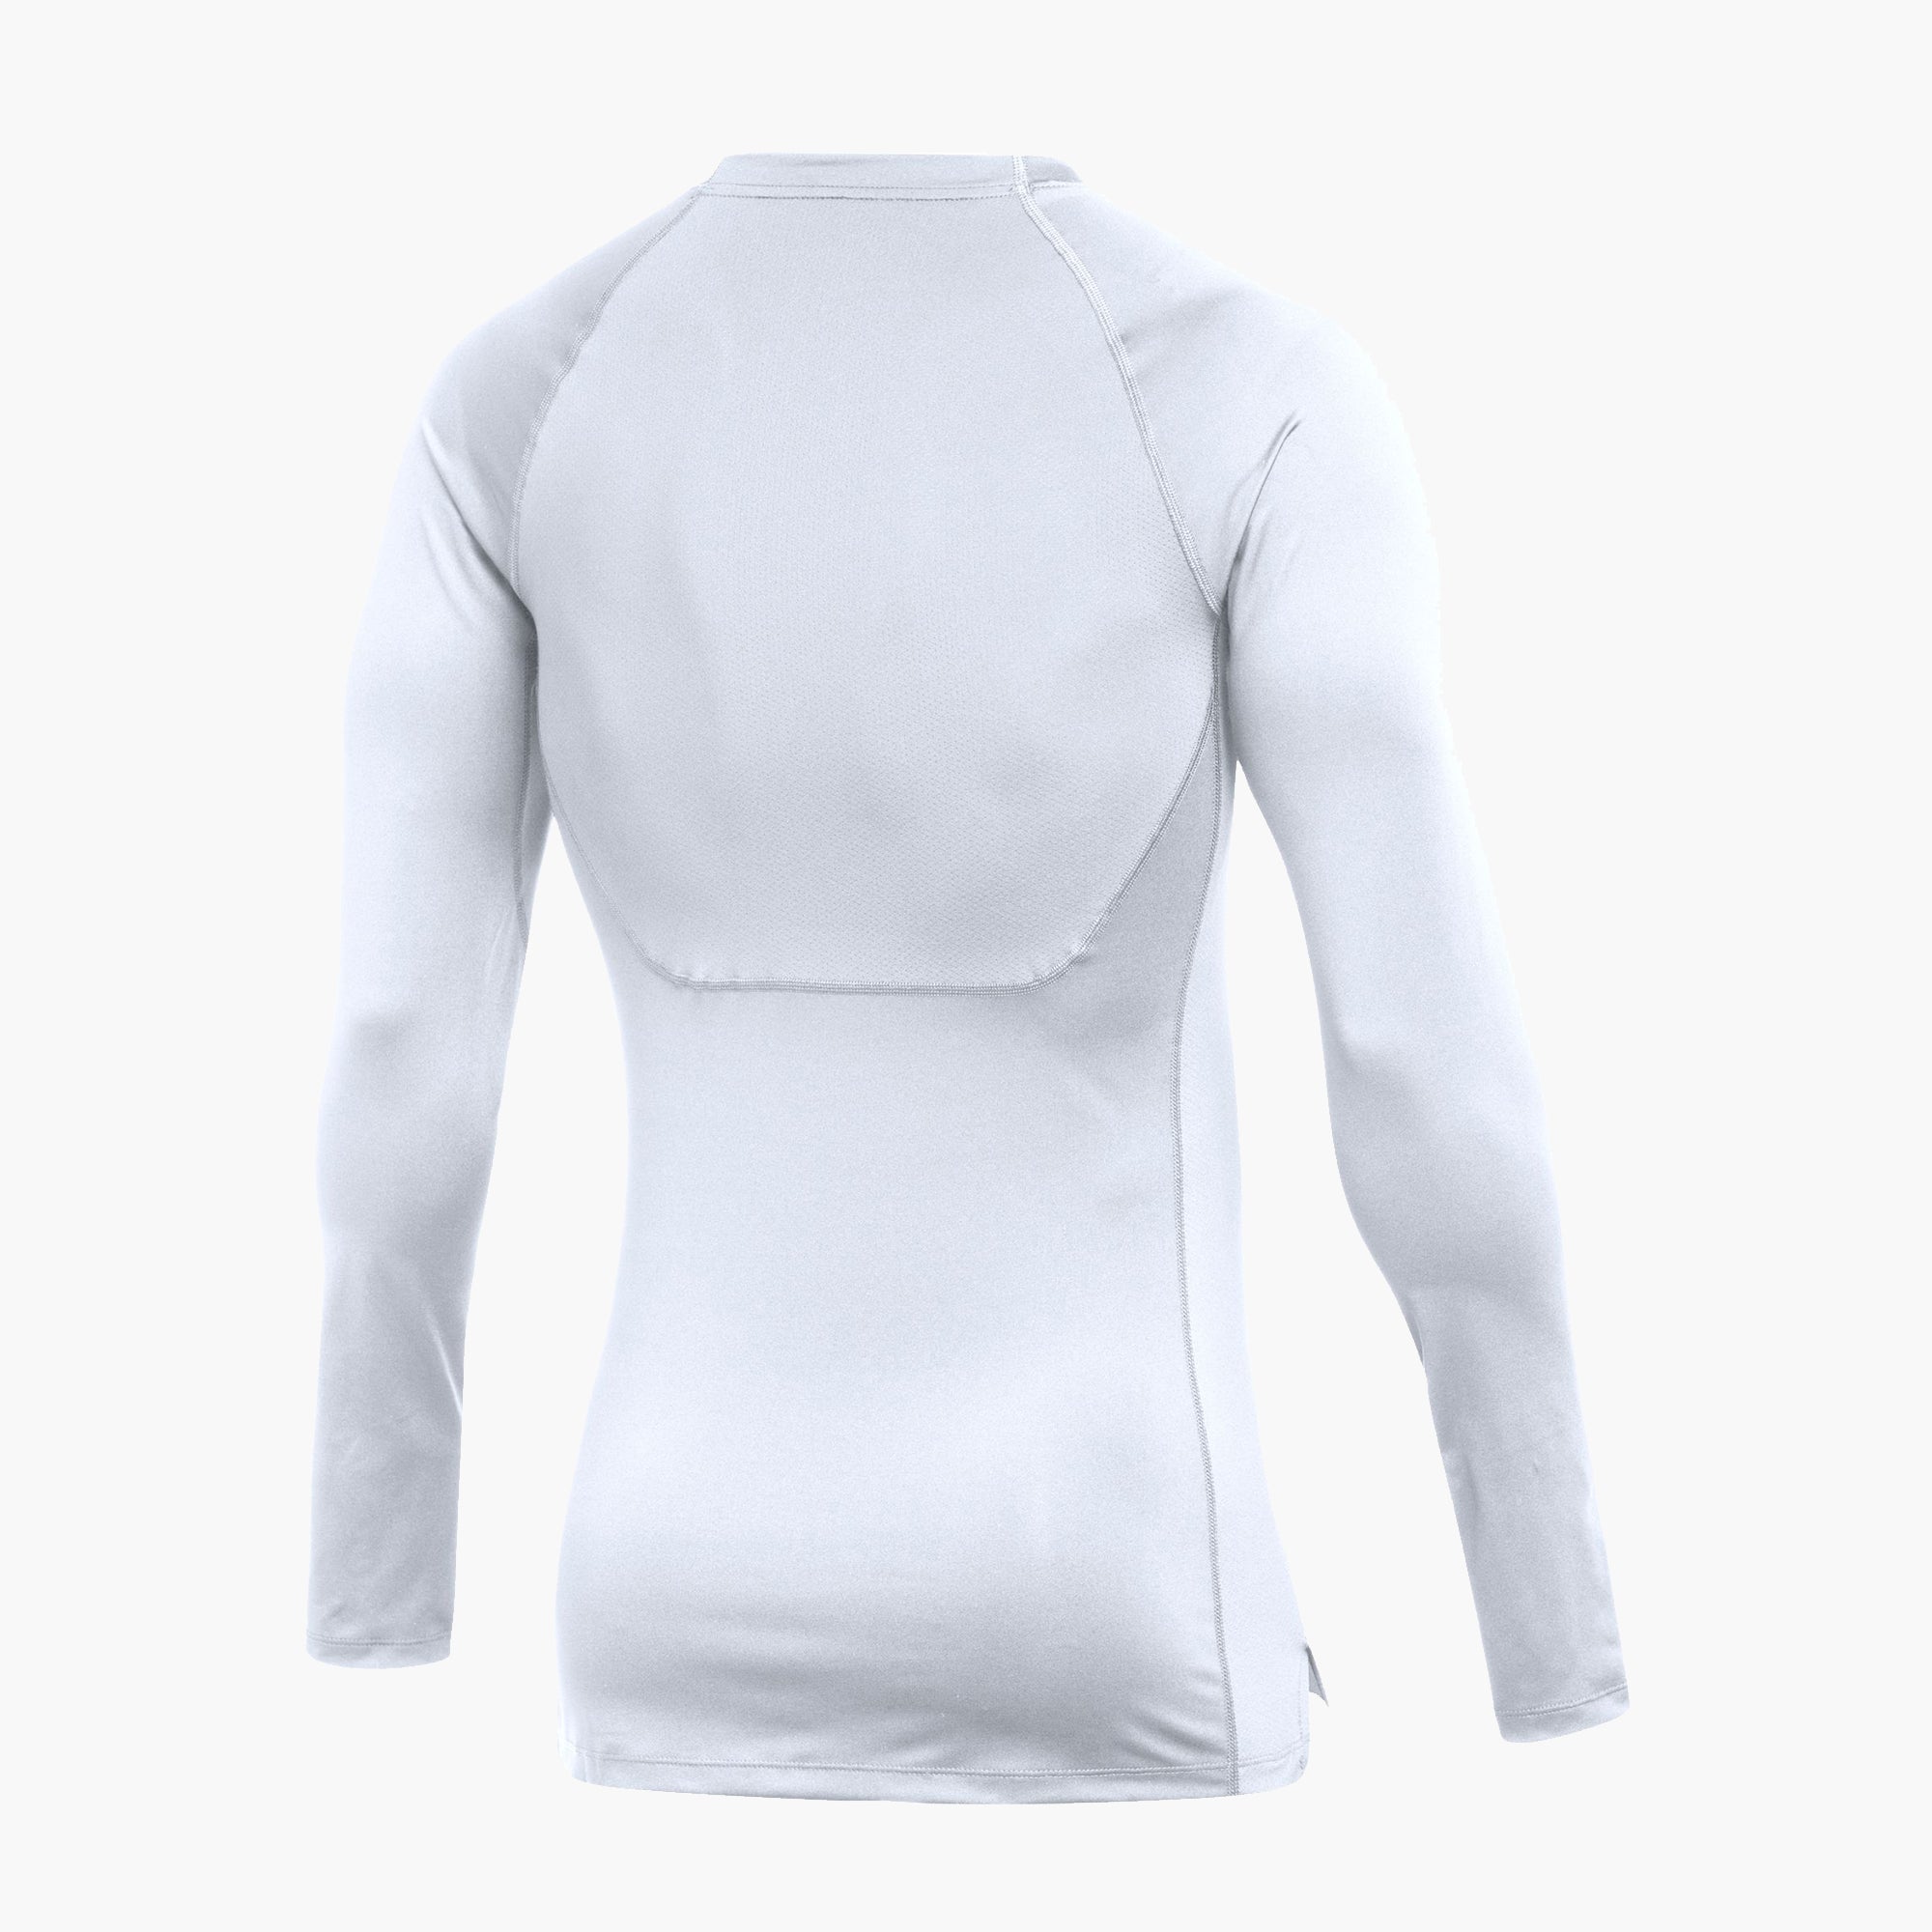 Nike DF Pro LS Tight Top White Size Mens Small